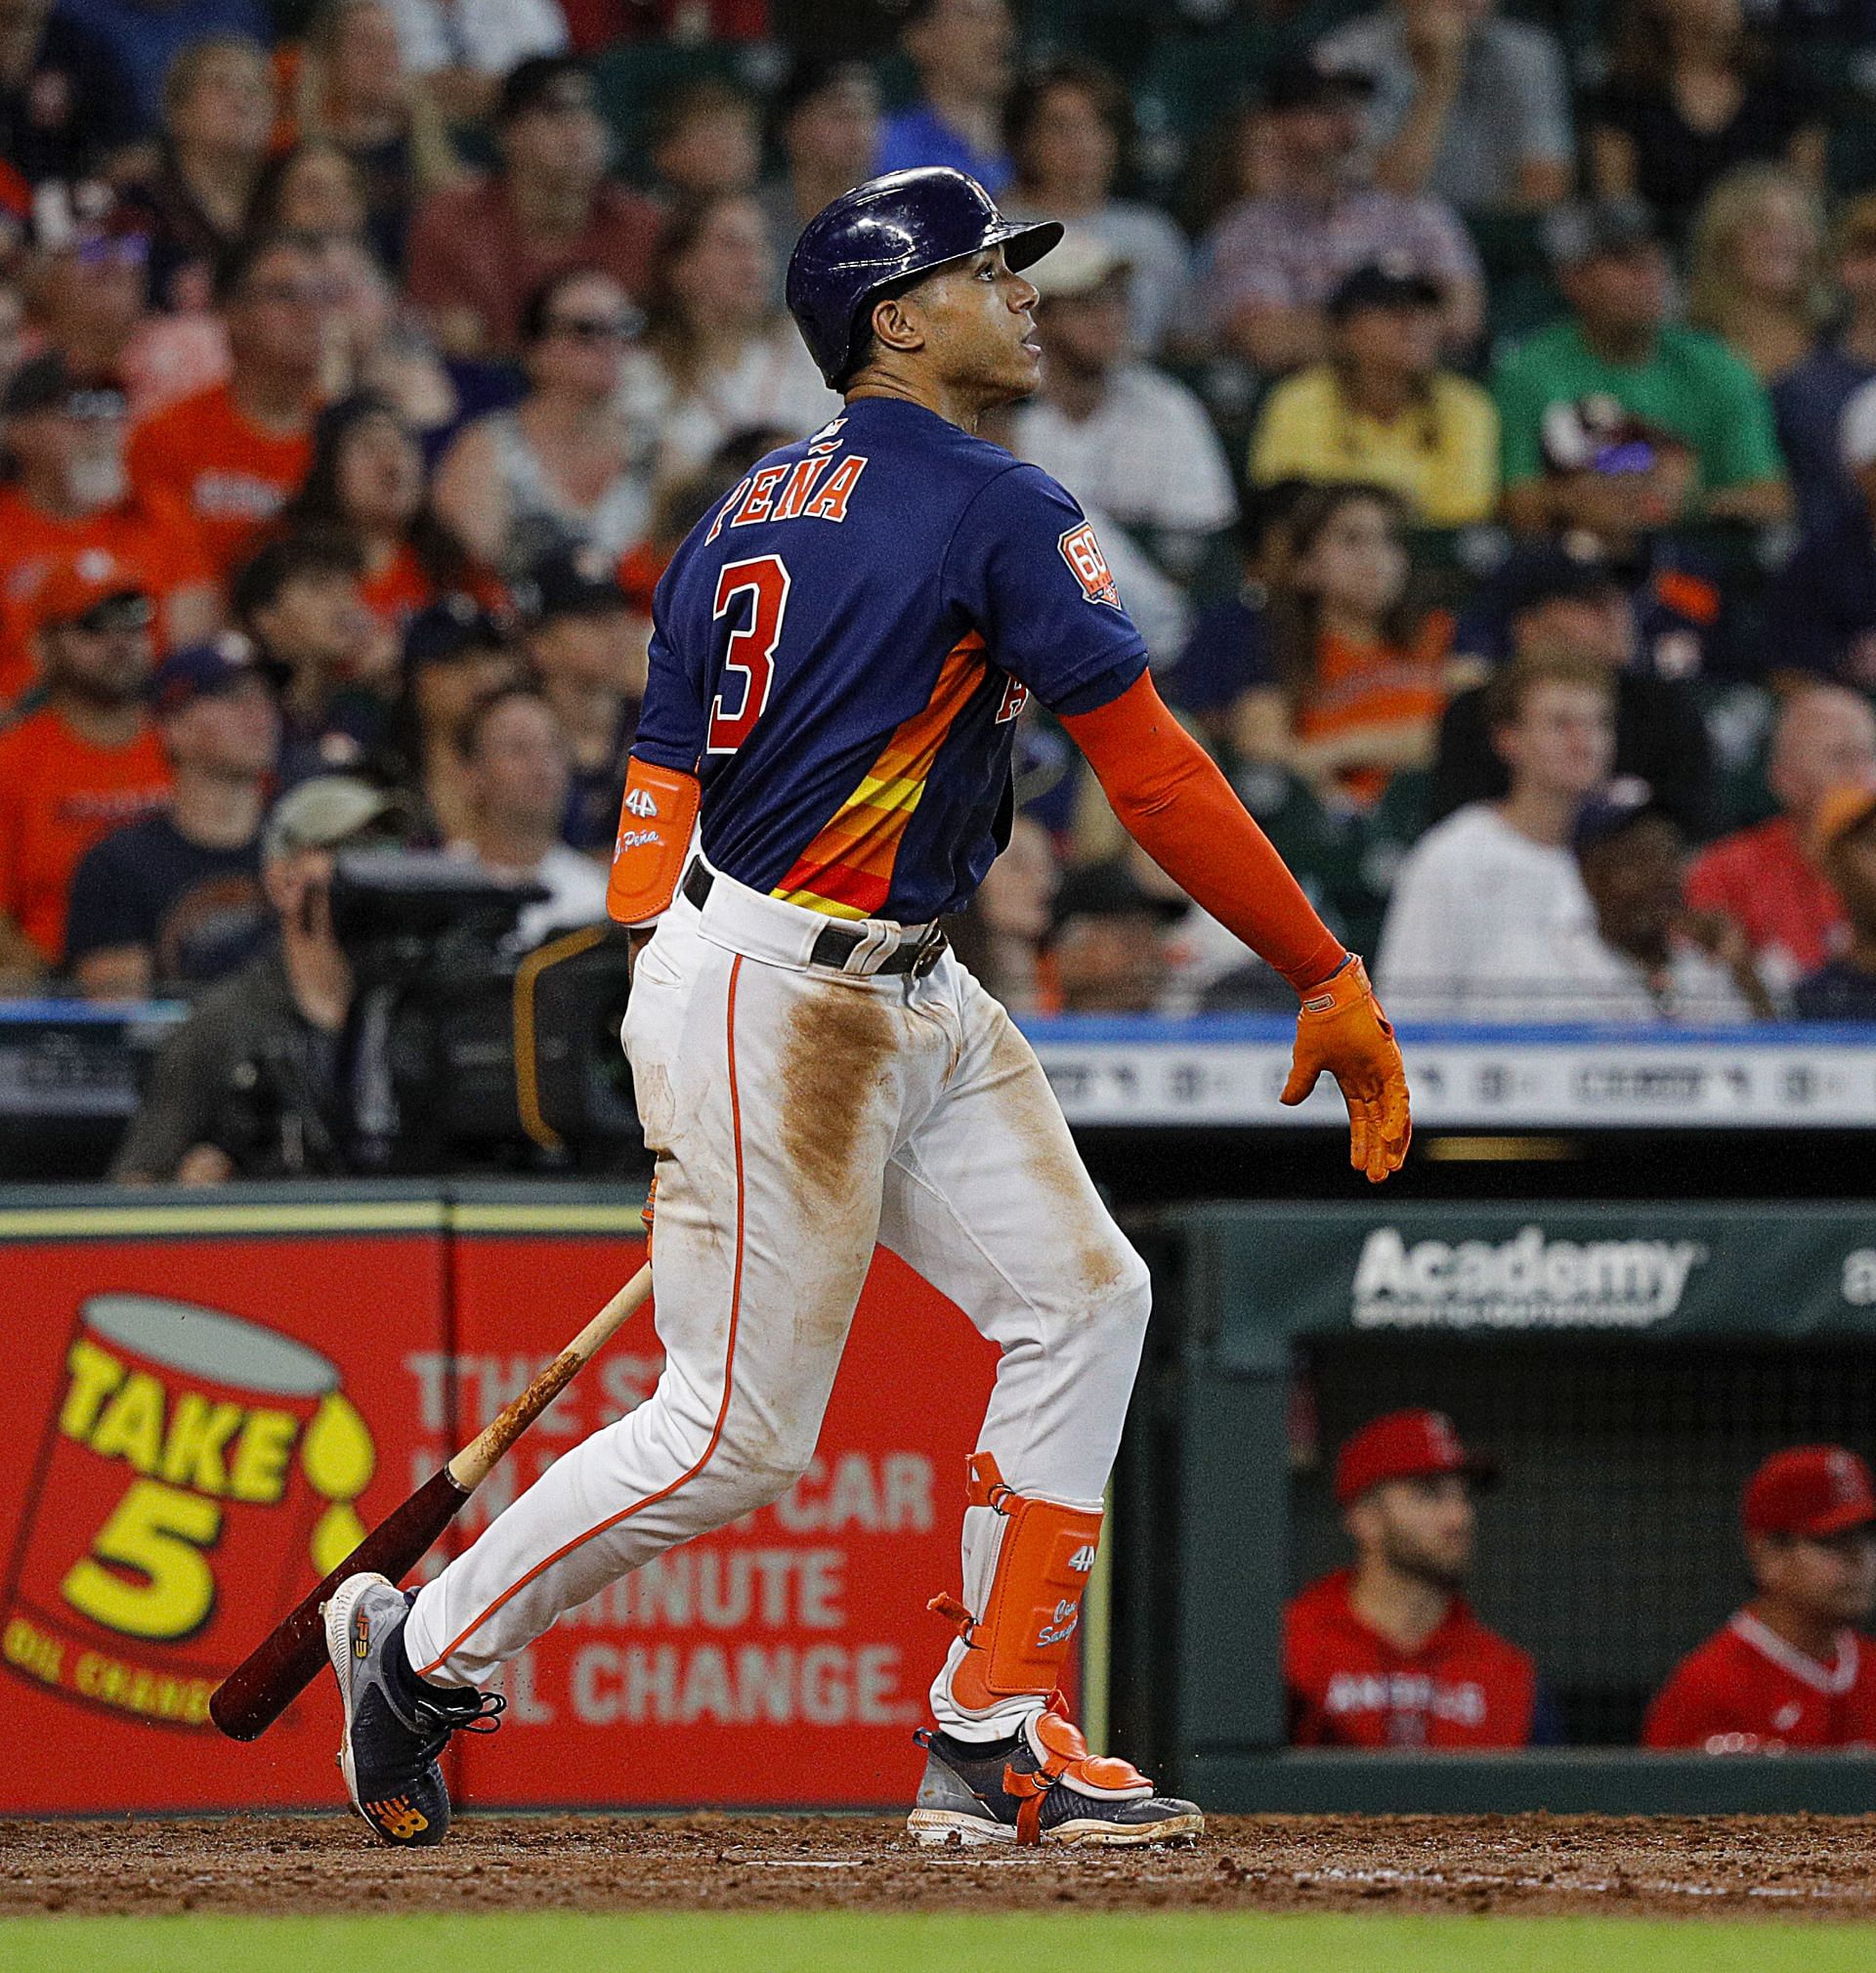 Houston Astros' Jeremy Pena watches his hits an RBI single during